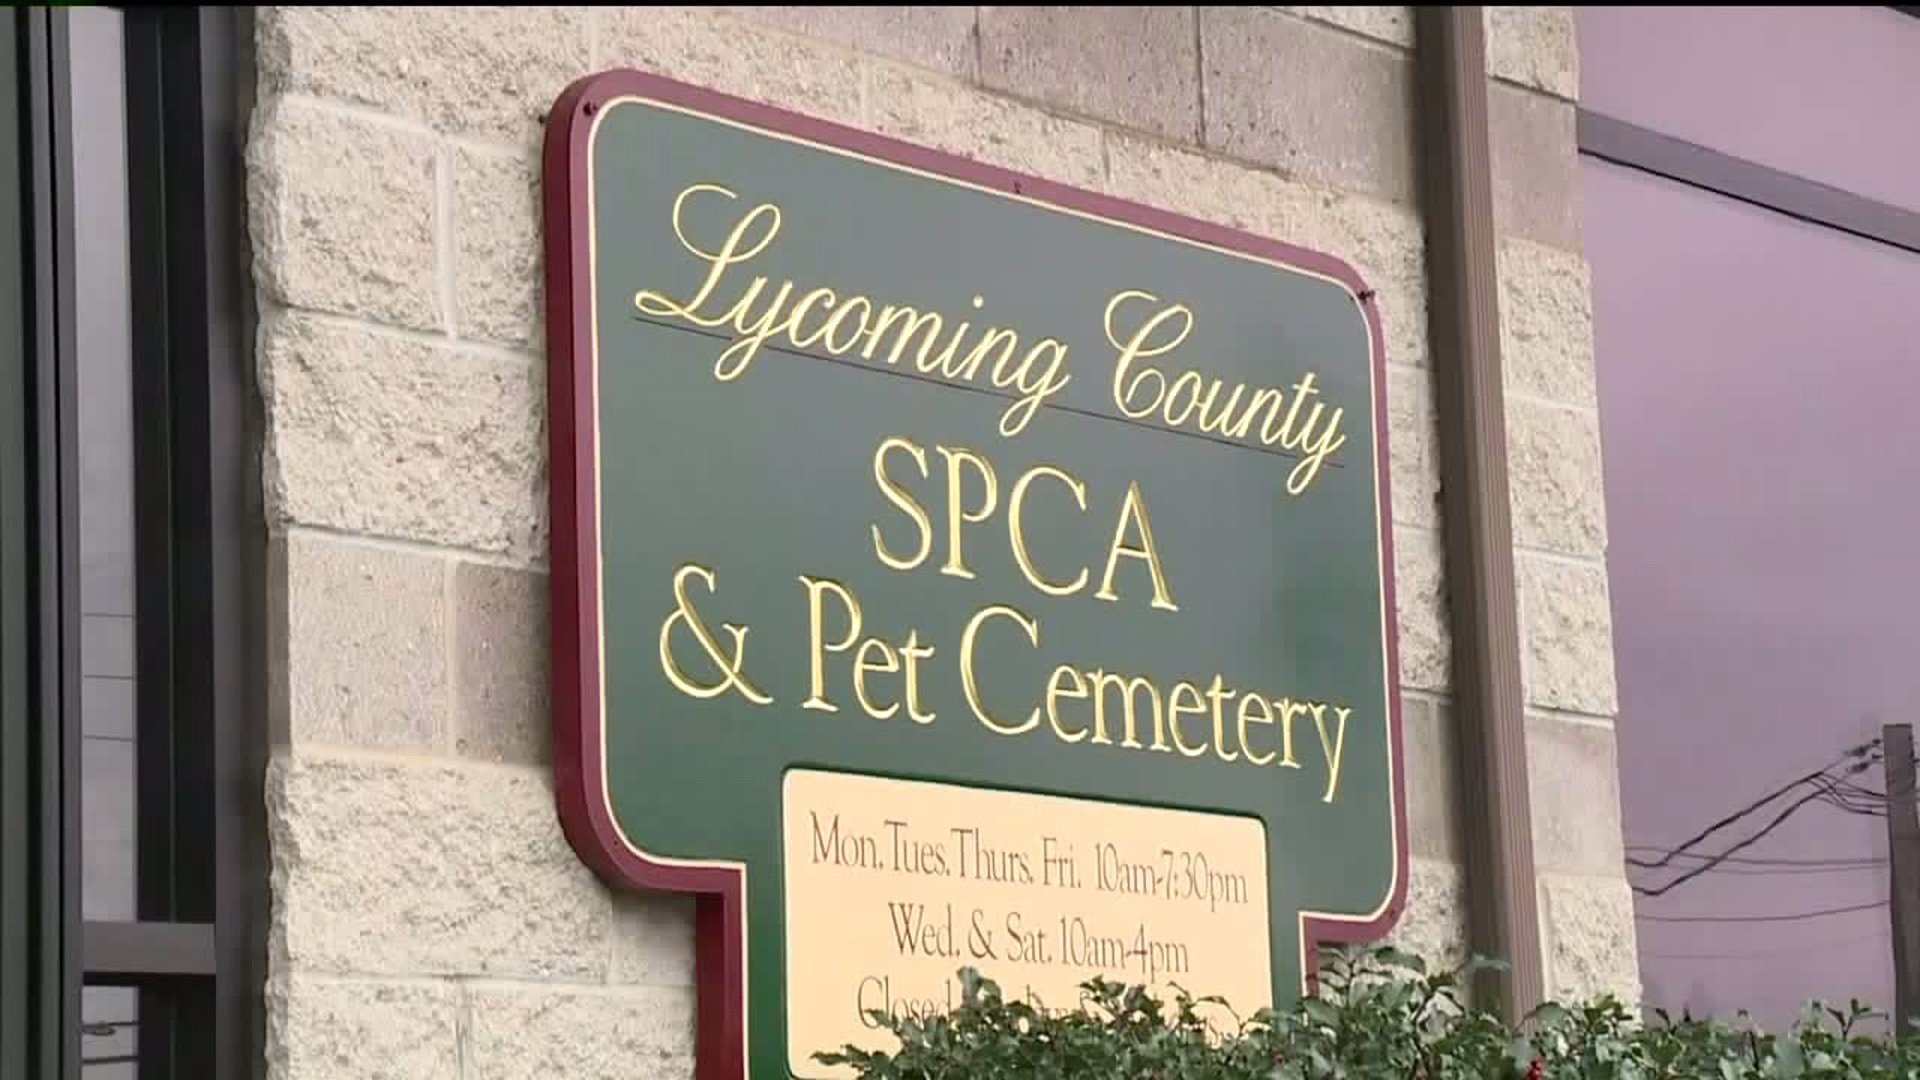 Making A Wish Come True for Furry Friends at Lycoming County SPCA